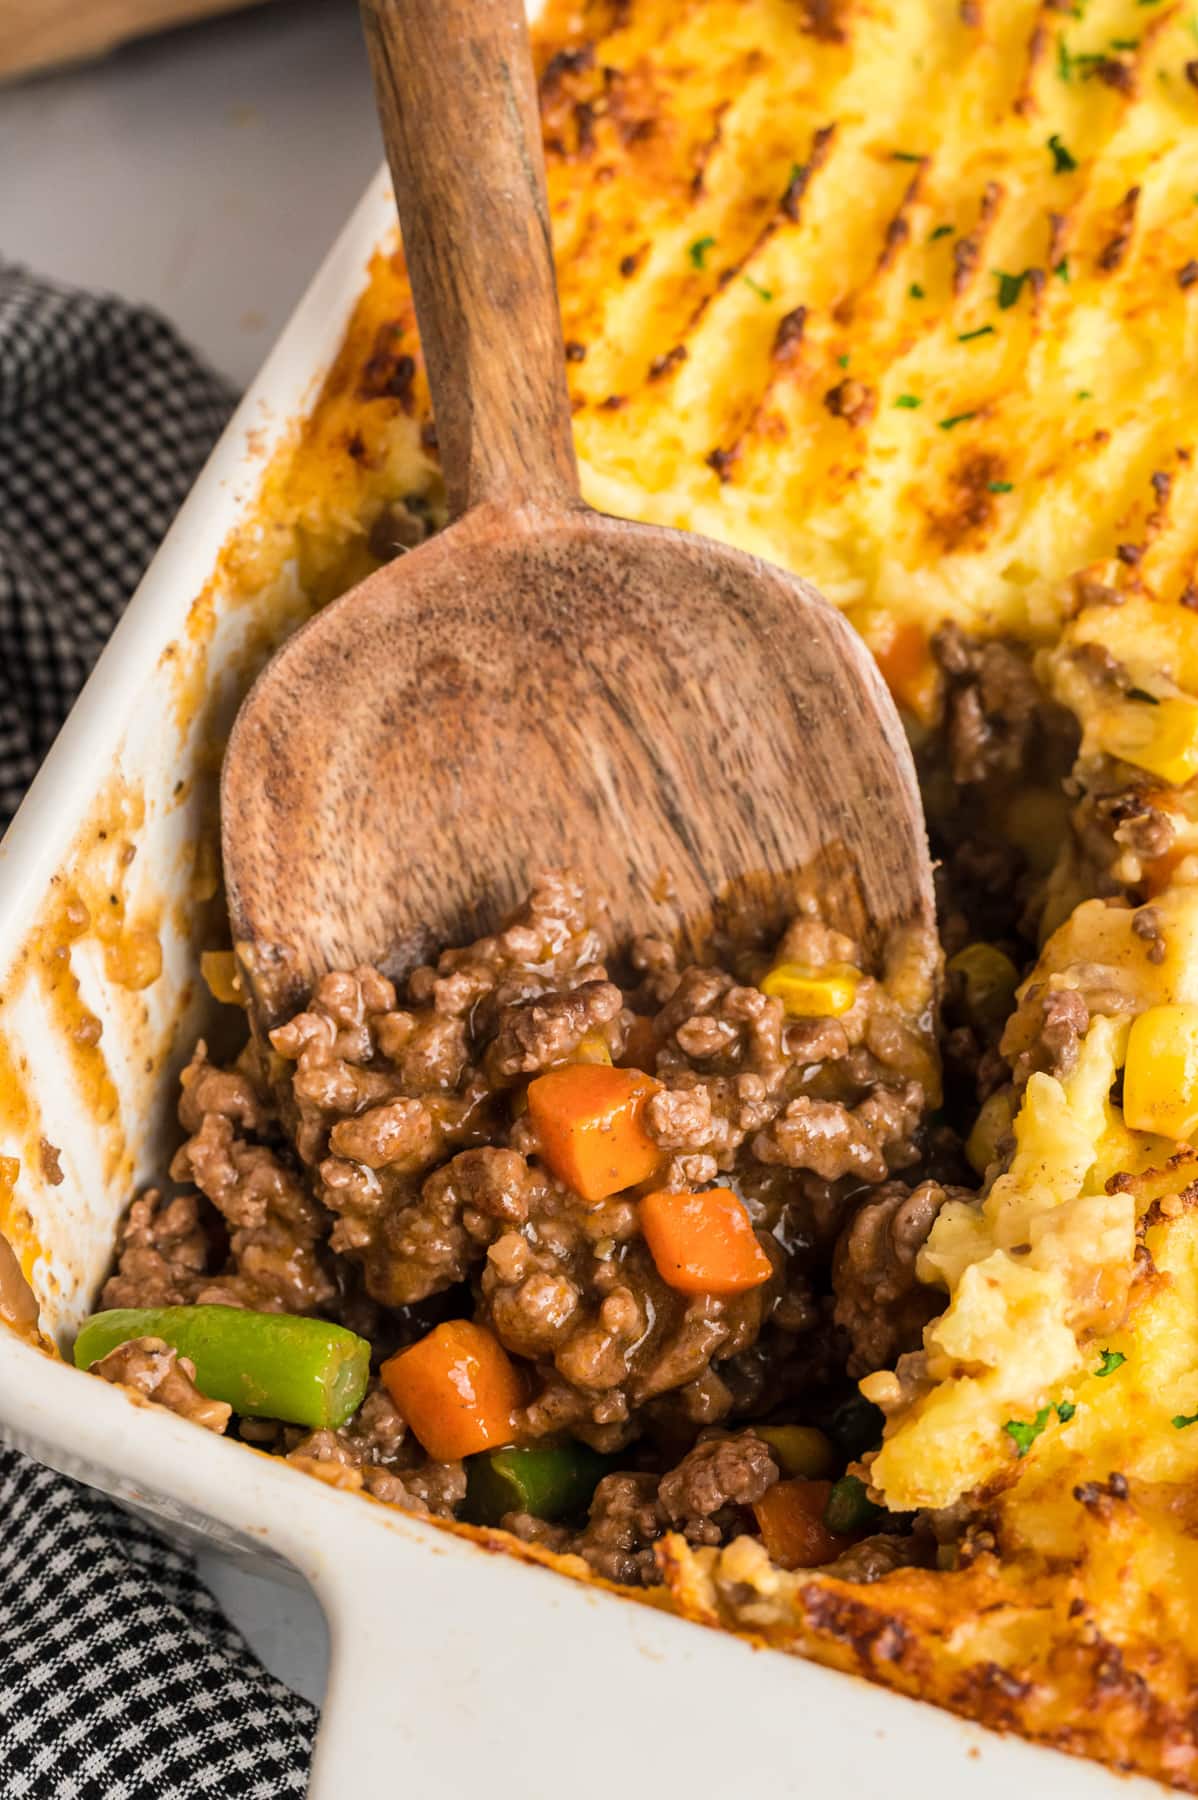 A wooden spoon in a dish of cottage pie